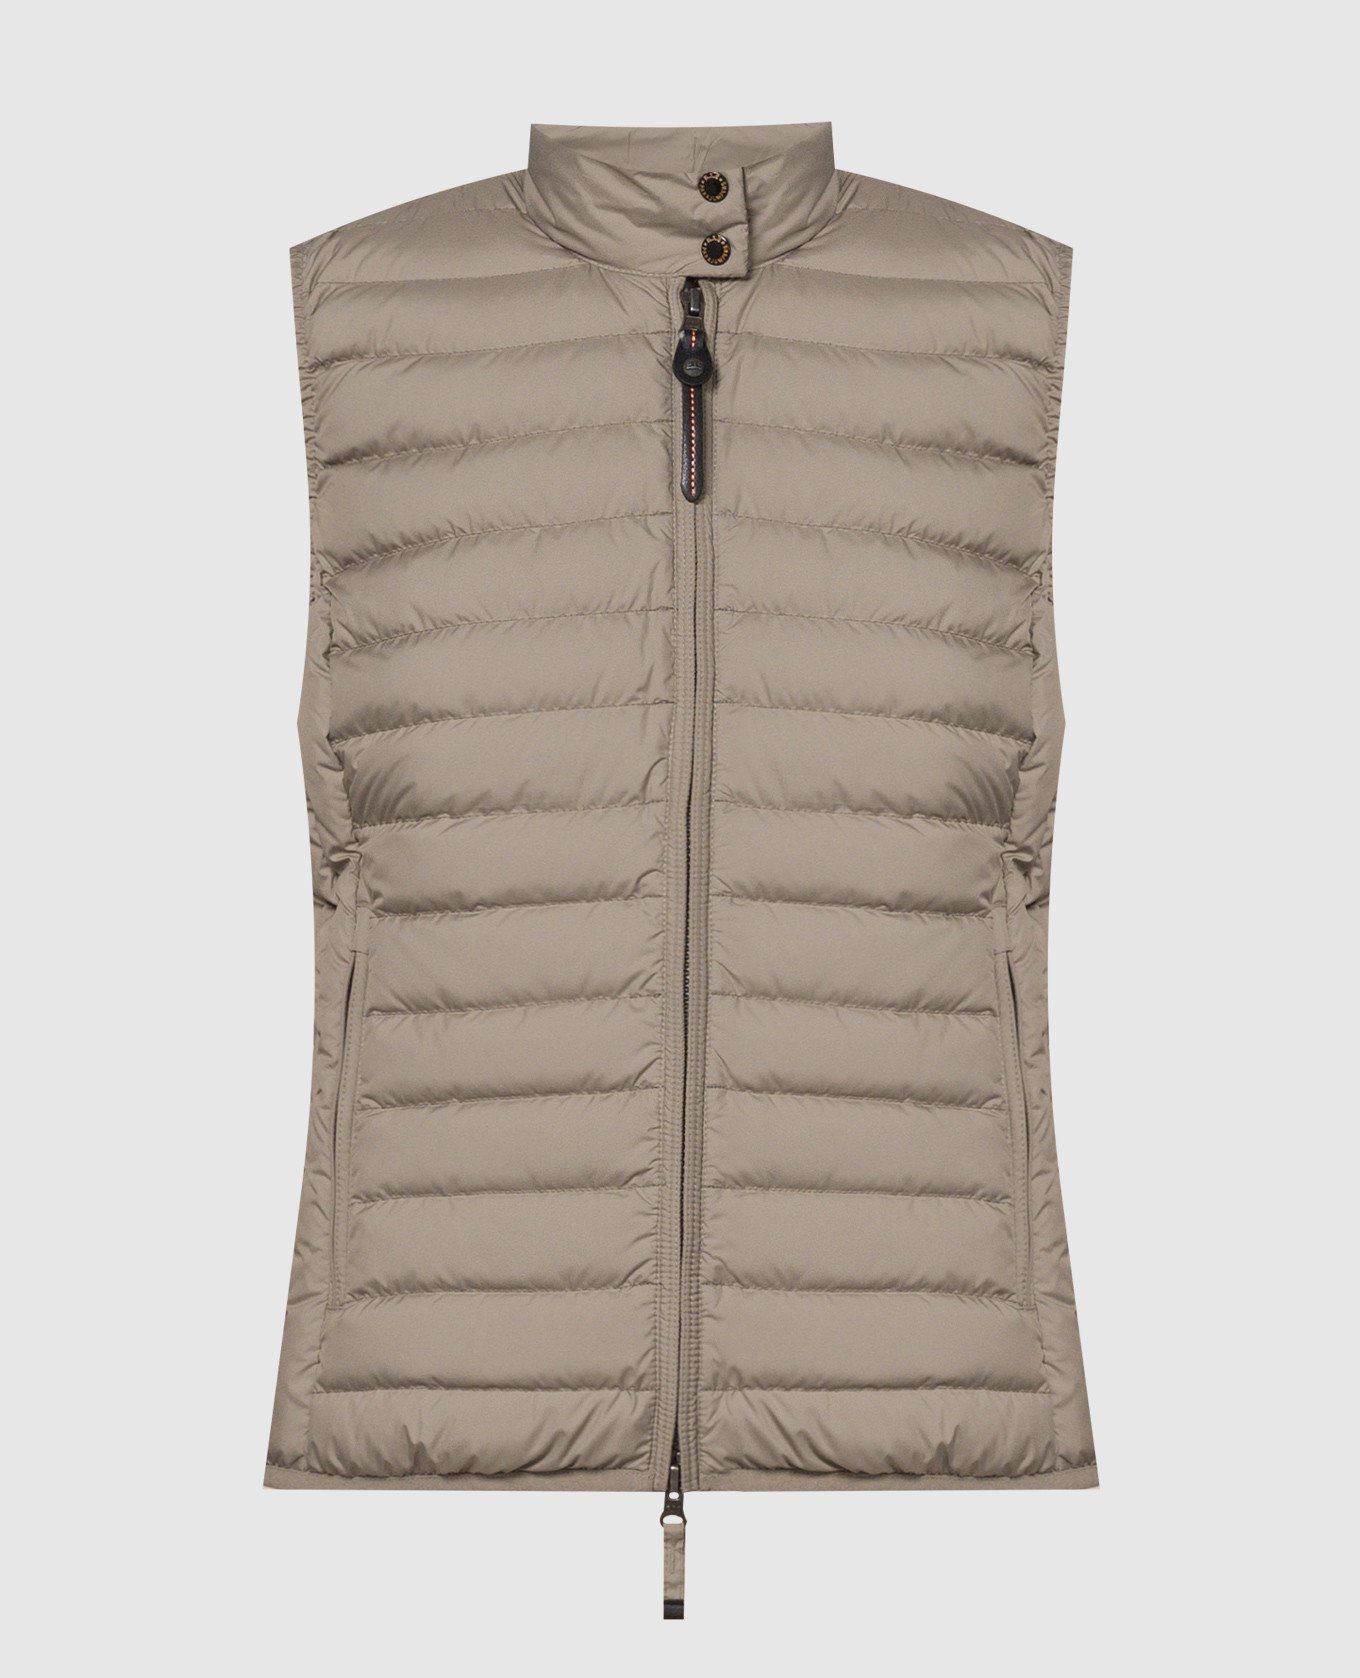 Dodie down jacket in khaki color